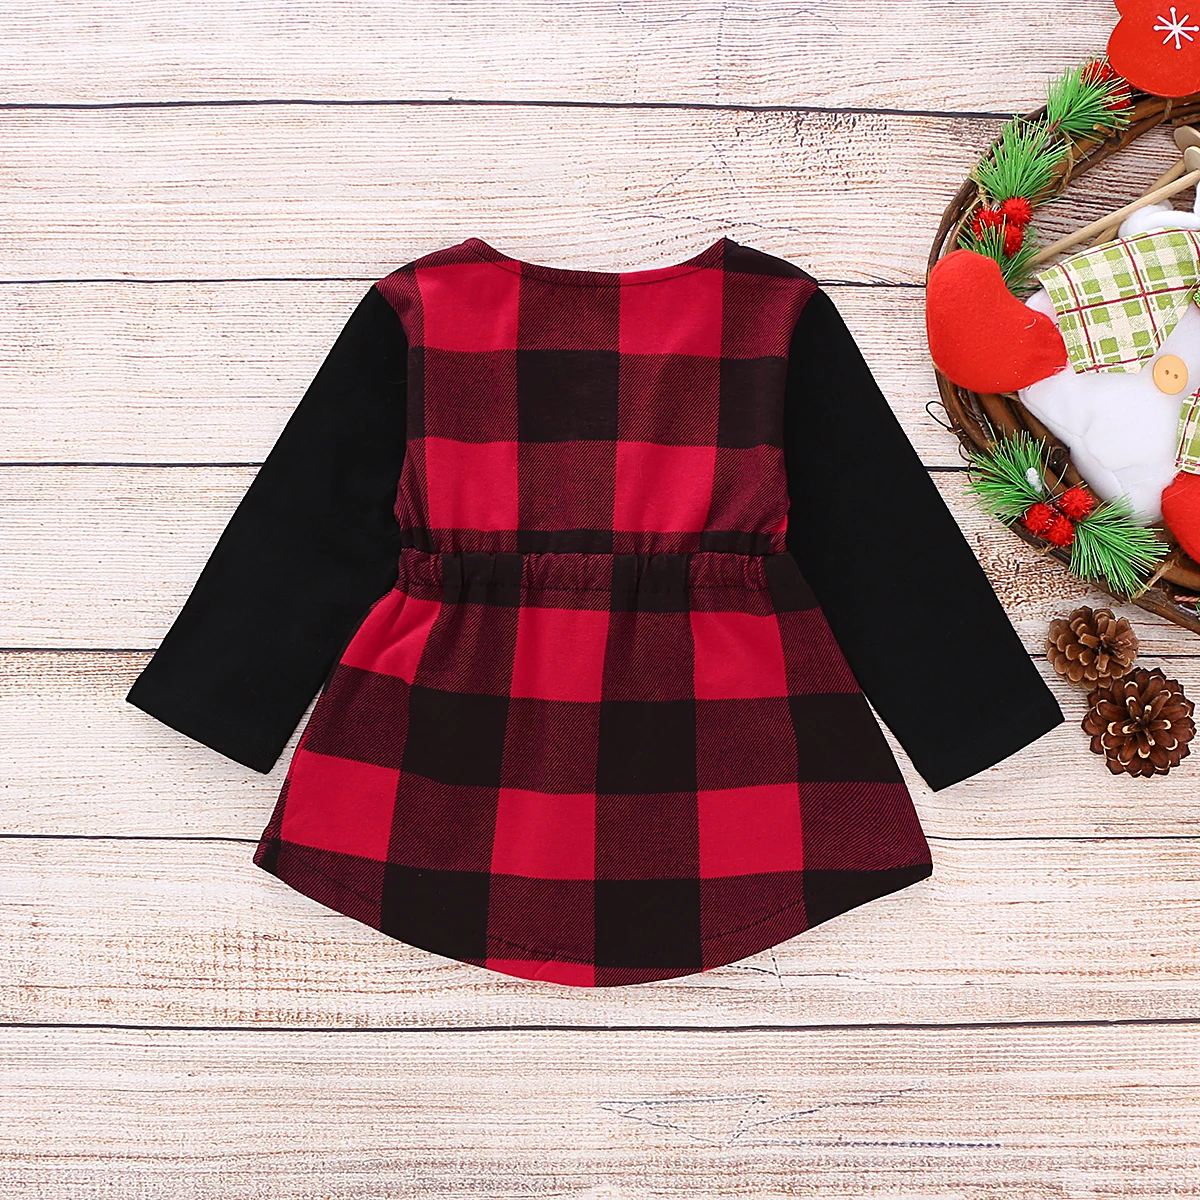 

Pudcoco 2020 Autumn 6M-4Y Toddler Baby Girls Red Plaid Black Long Sleeve Dress Bow Buttons Casual Infant Kids Children Outfits